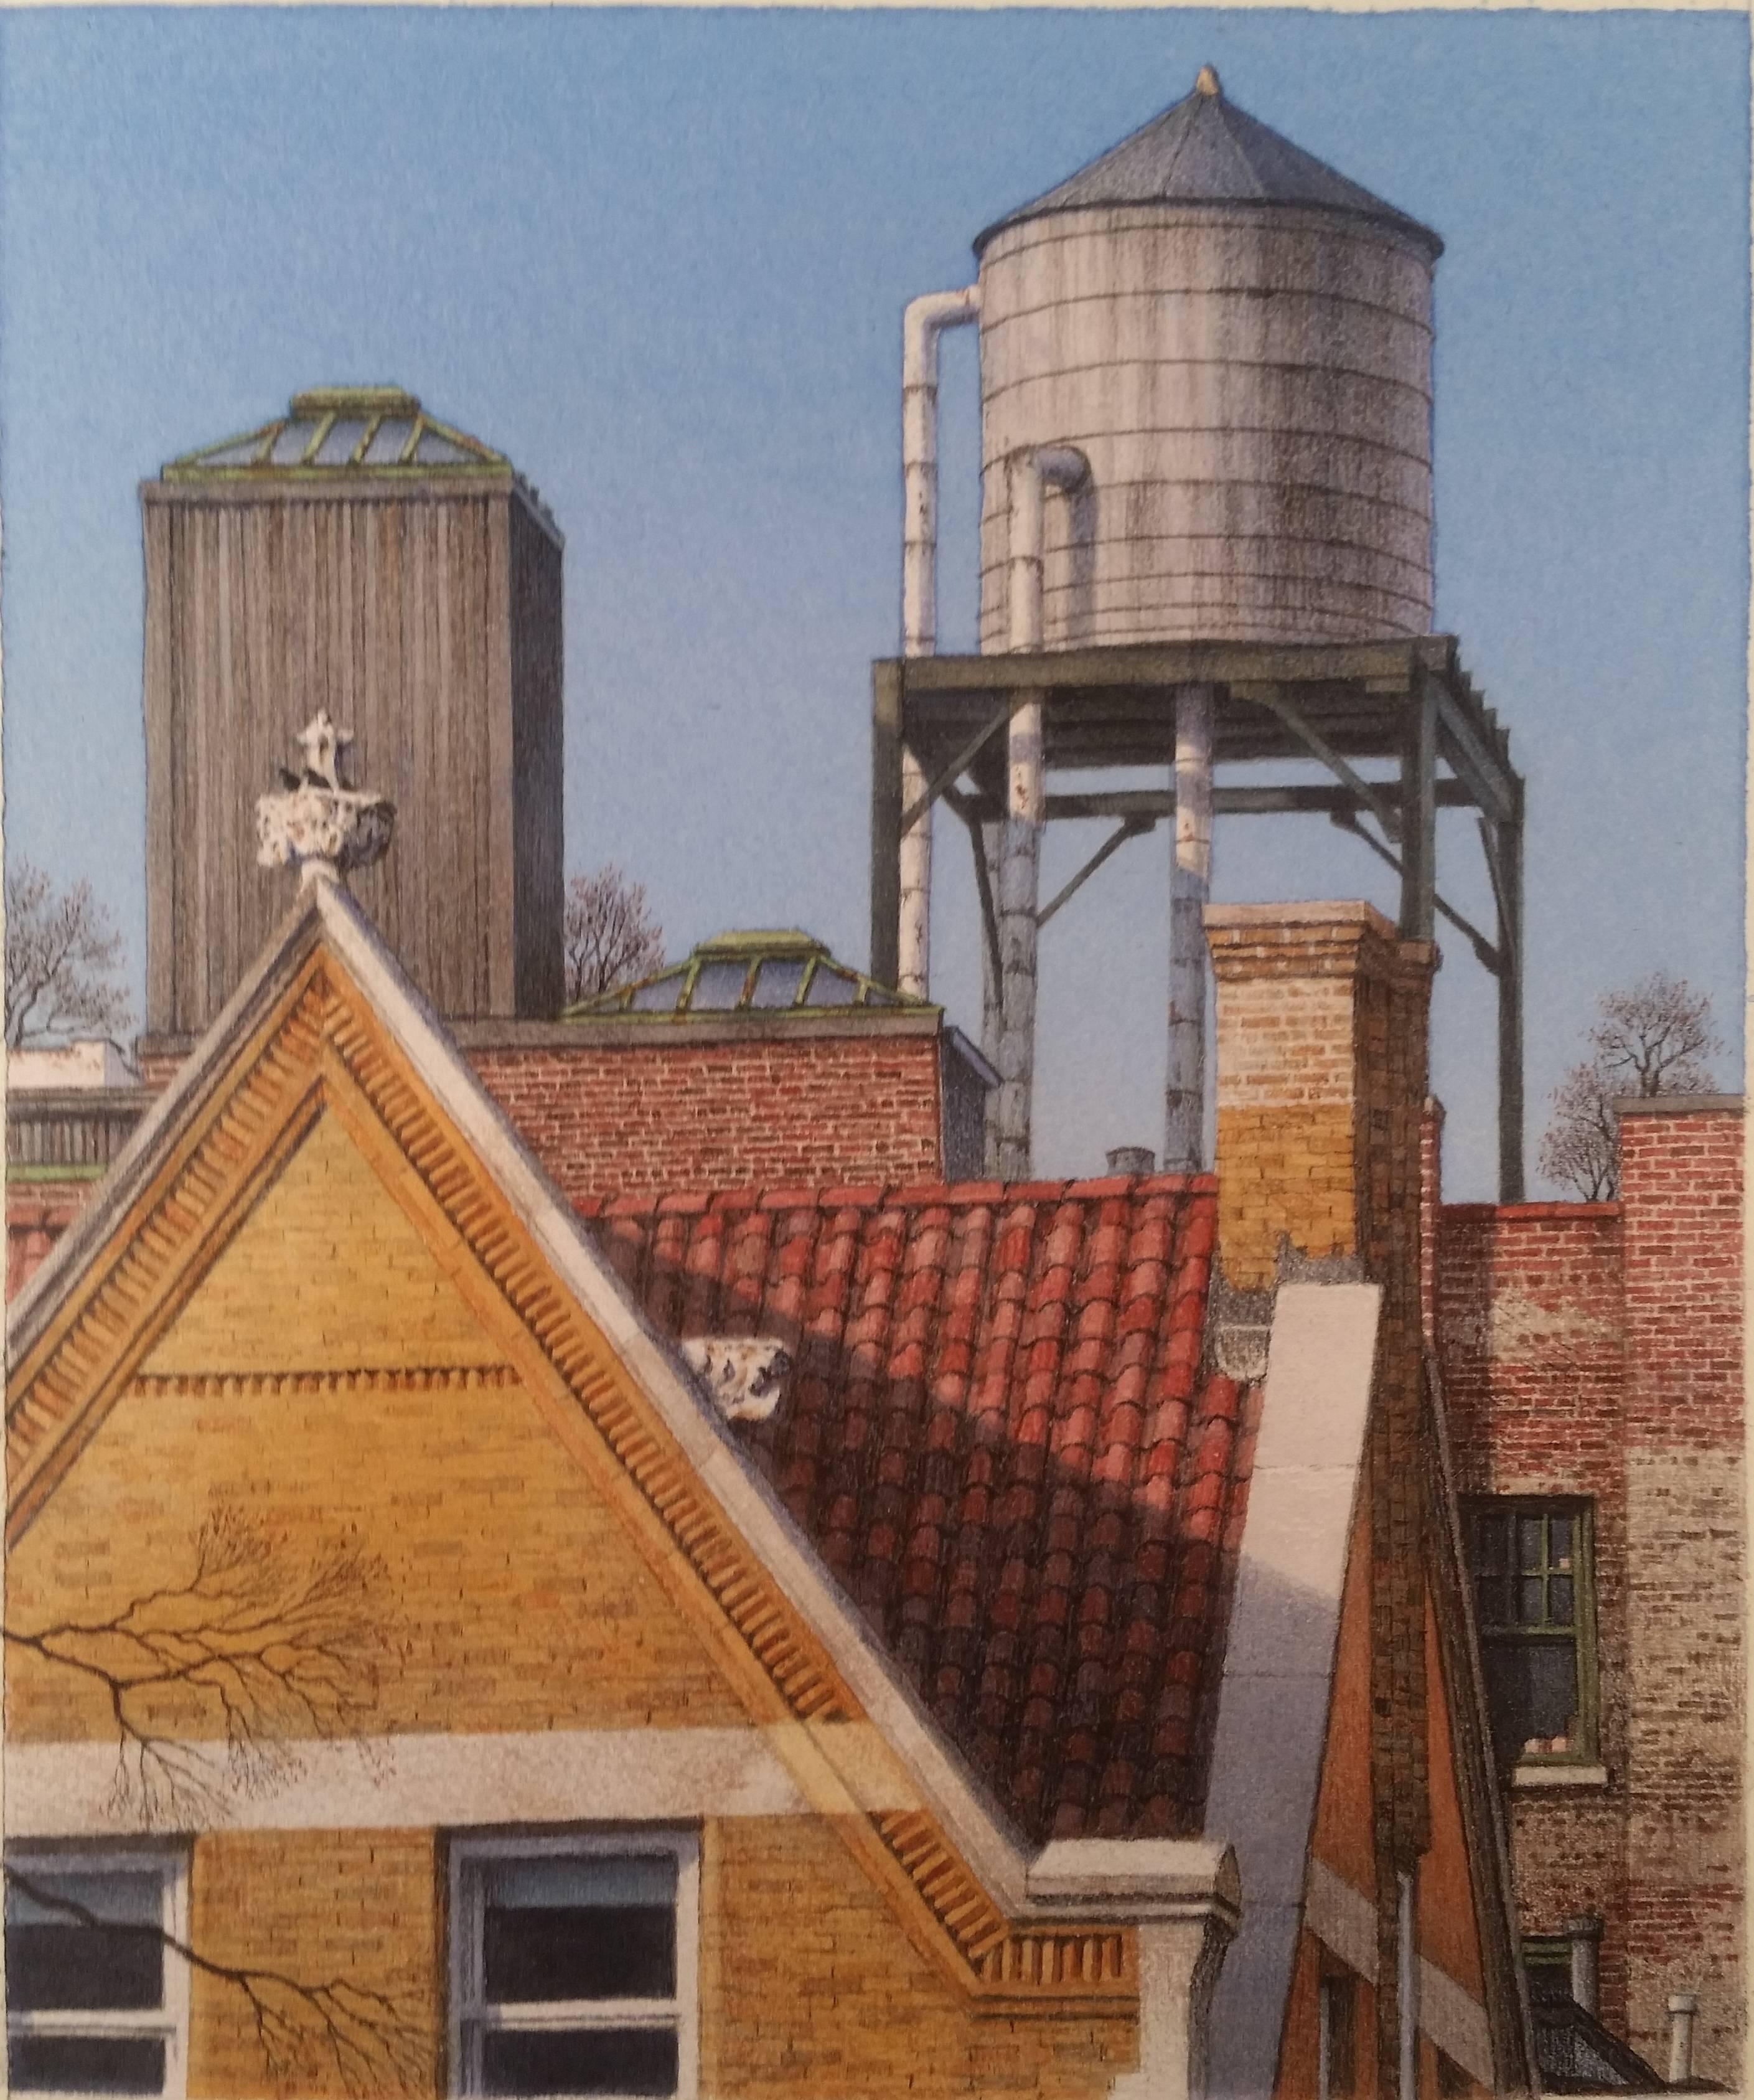 Frederick Brosen's watercolor over graphite, 77th Street and West End Avenue, lends an almost provincial lens to New York City's skyline. Bathed in warm sunlight, the water tower and building tops represent a space elevated from the chaos of the